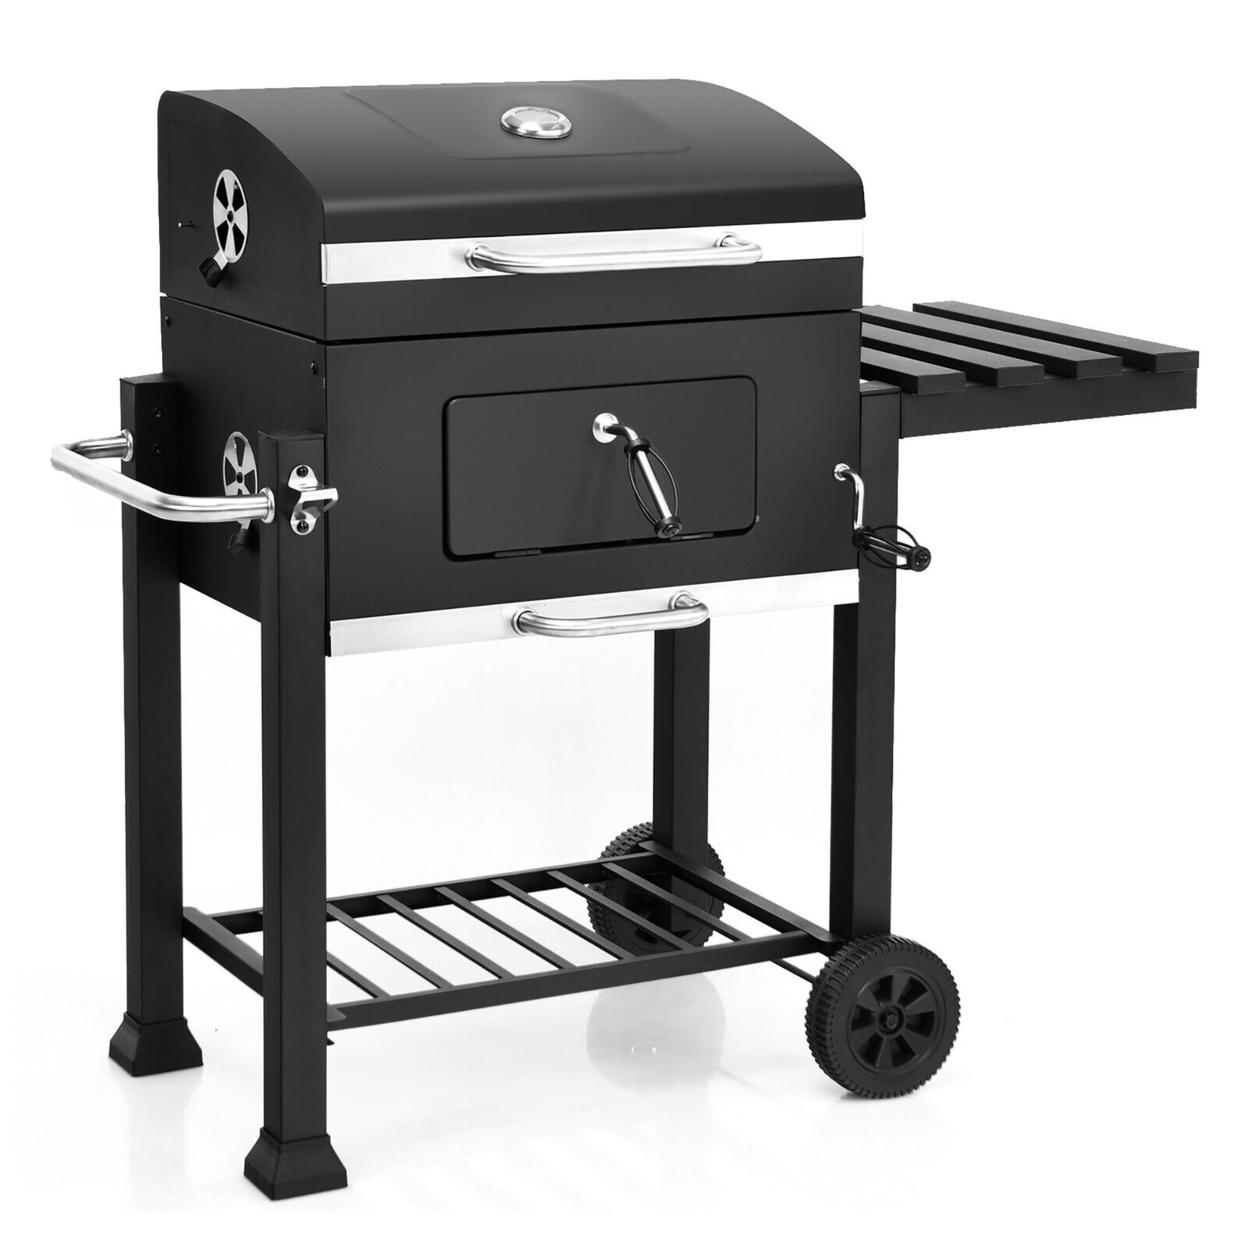 Costway Charcoal Grill Barbecue BBQ Grill Outdoor Patio Backyard Cooking Wheels Portable